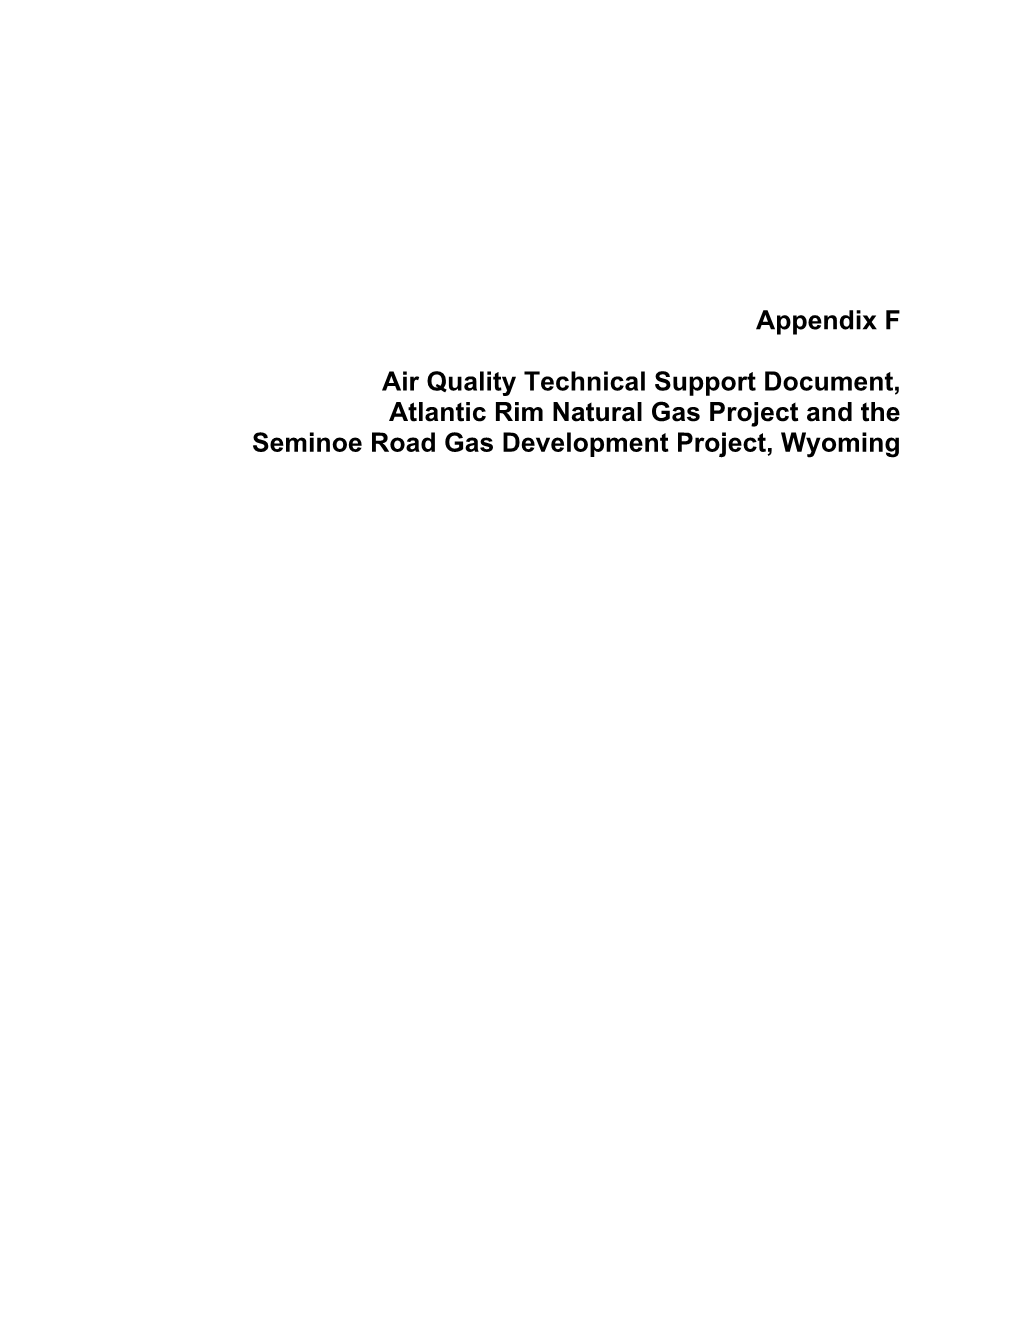 Air Quality Technical Support Document, Atlantic Rim Natural Gas